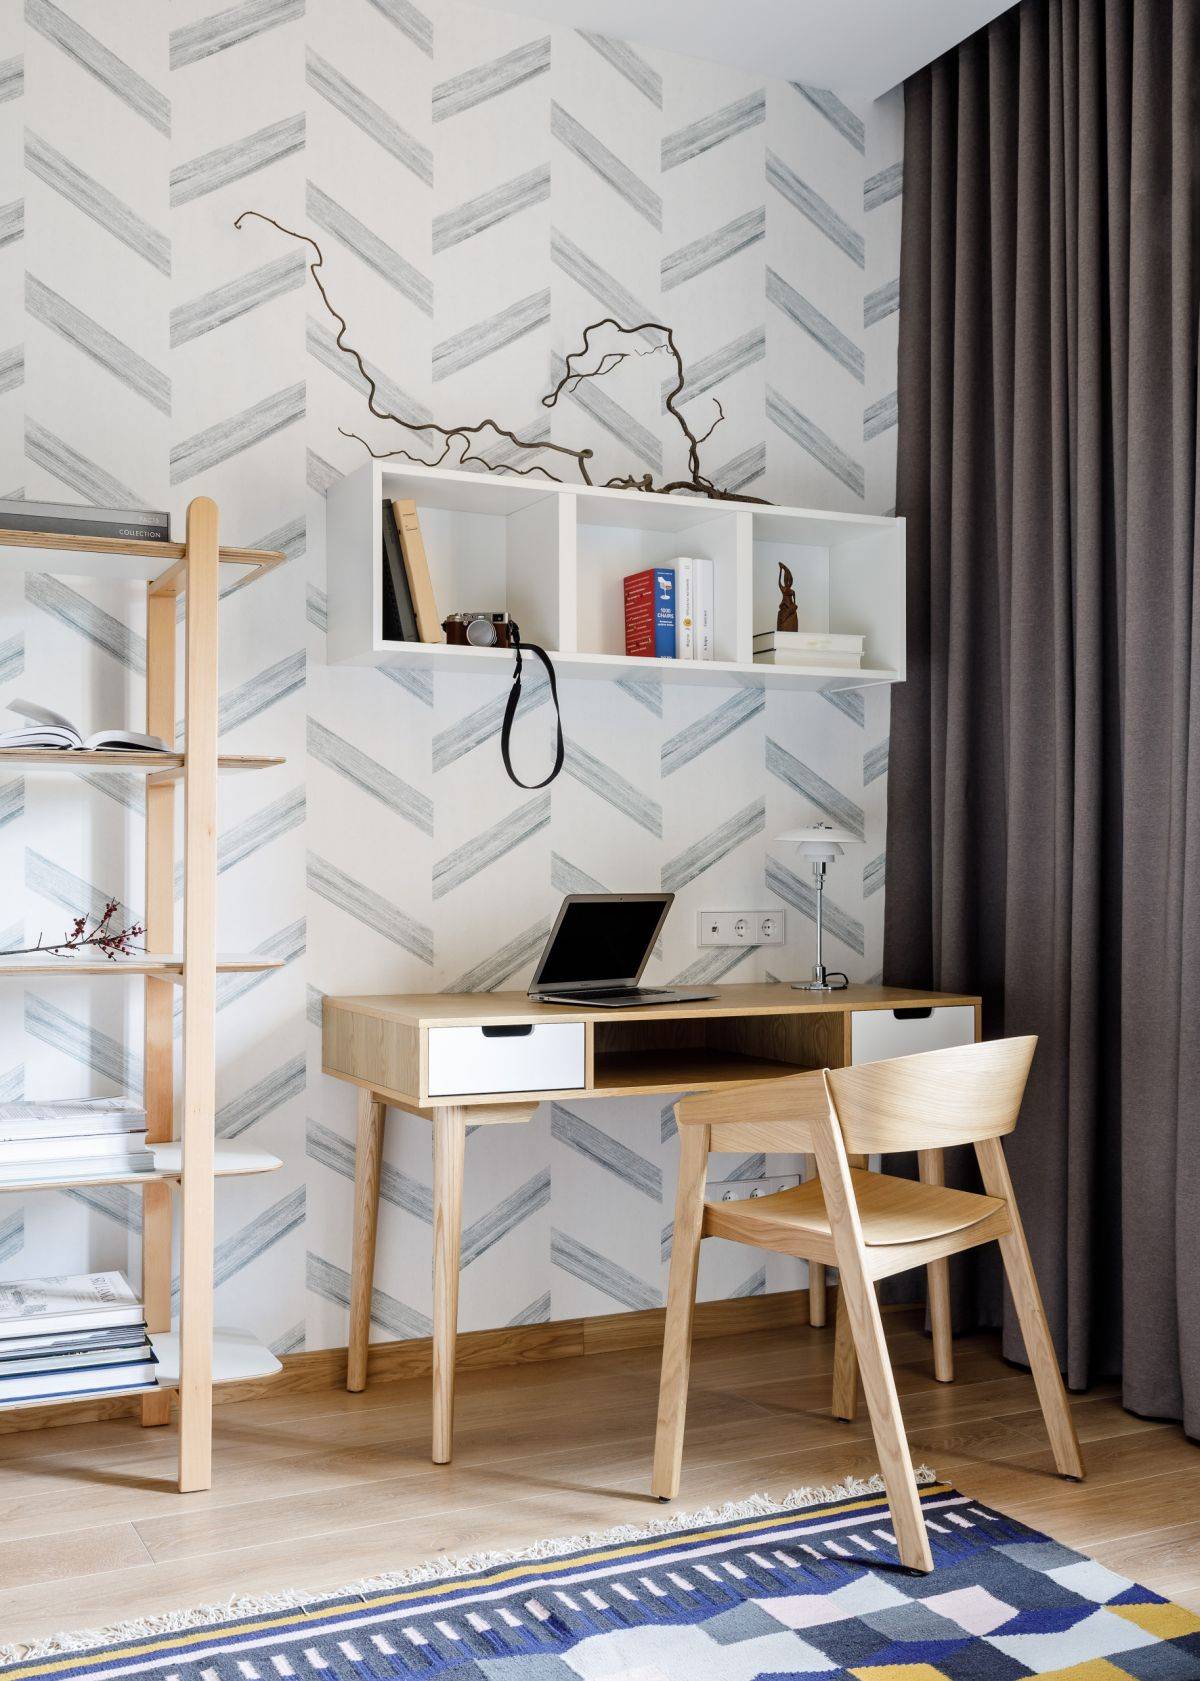 Custom-storage-solutions-can-turn-even-the-smallest-of-rooms-into-a-fabulous-home-office-99307